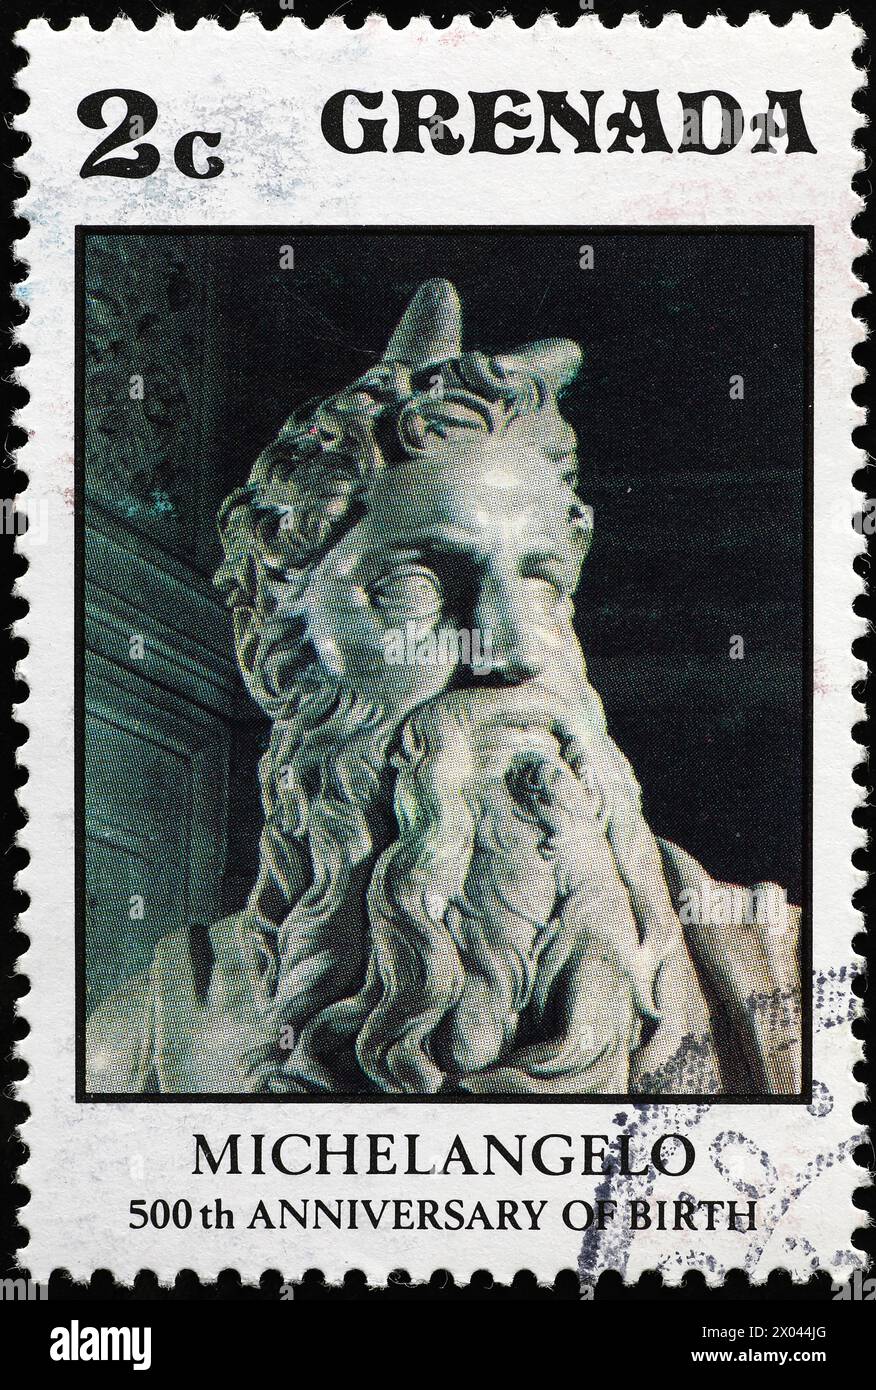 Head of Moses by Michelangelo on postage stamp Stock Photo